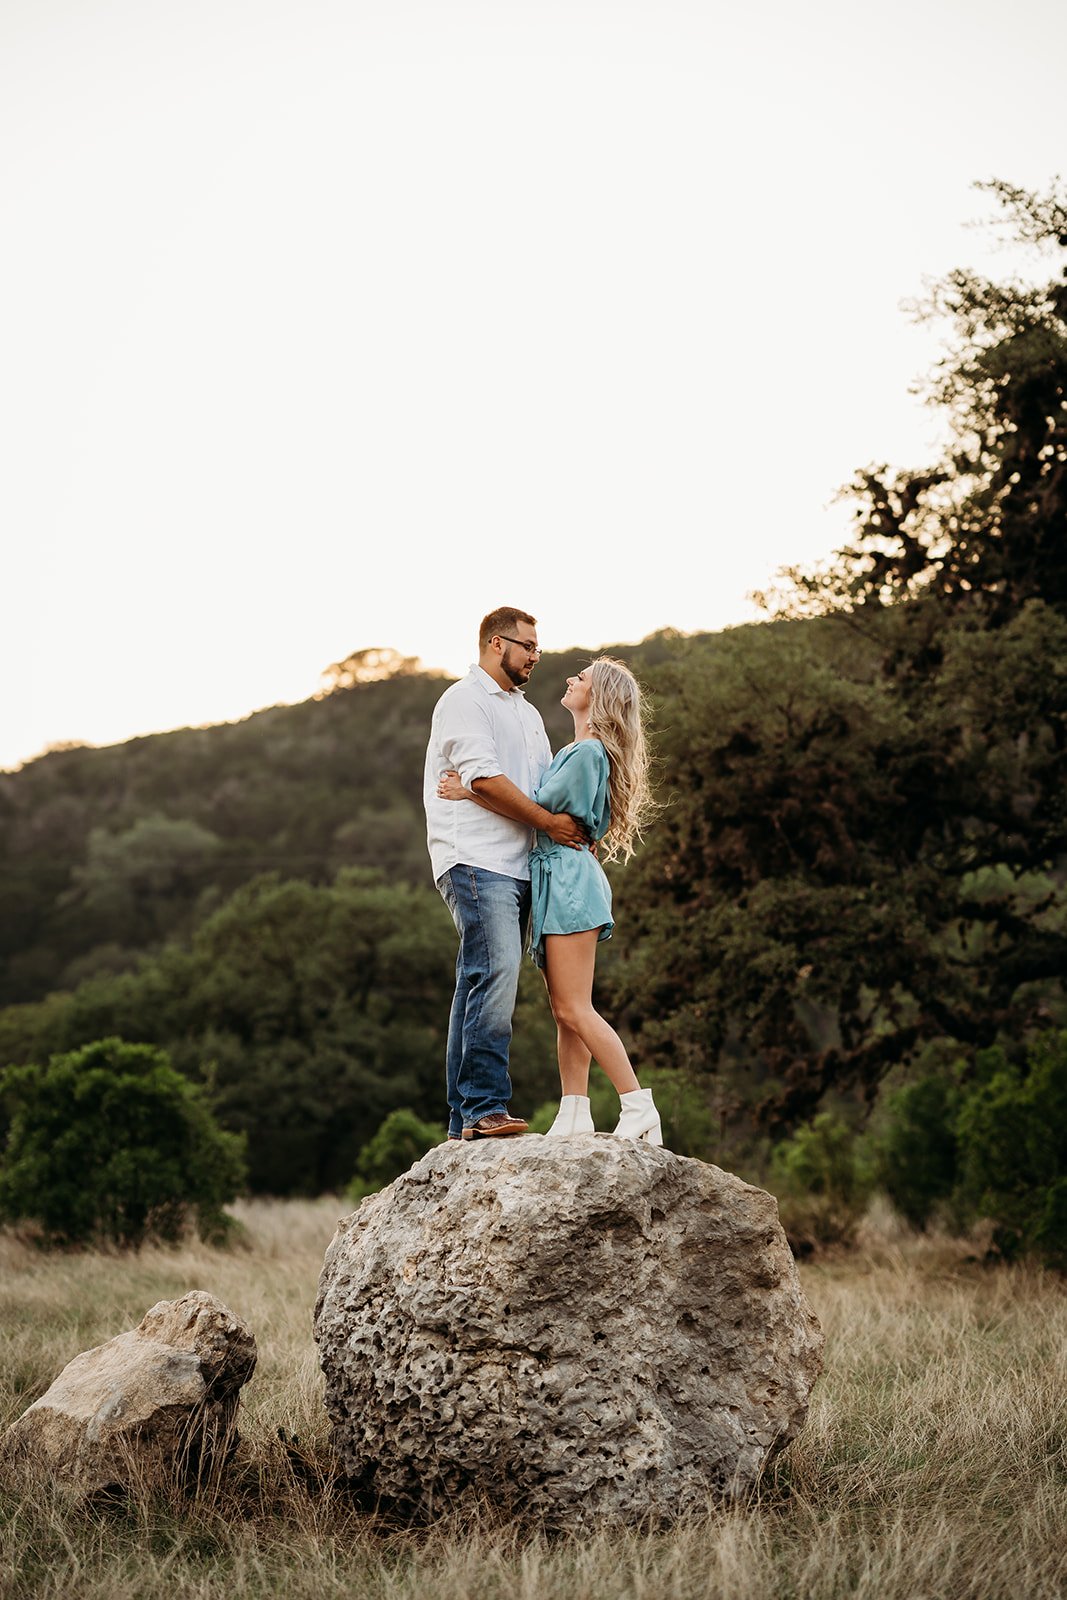 Romantic Summer Engagement Session at Riding River Ranch